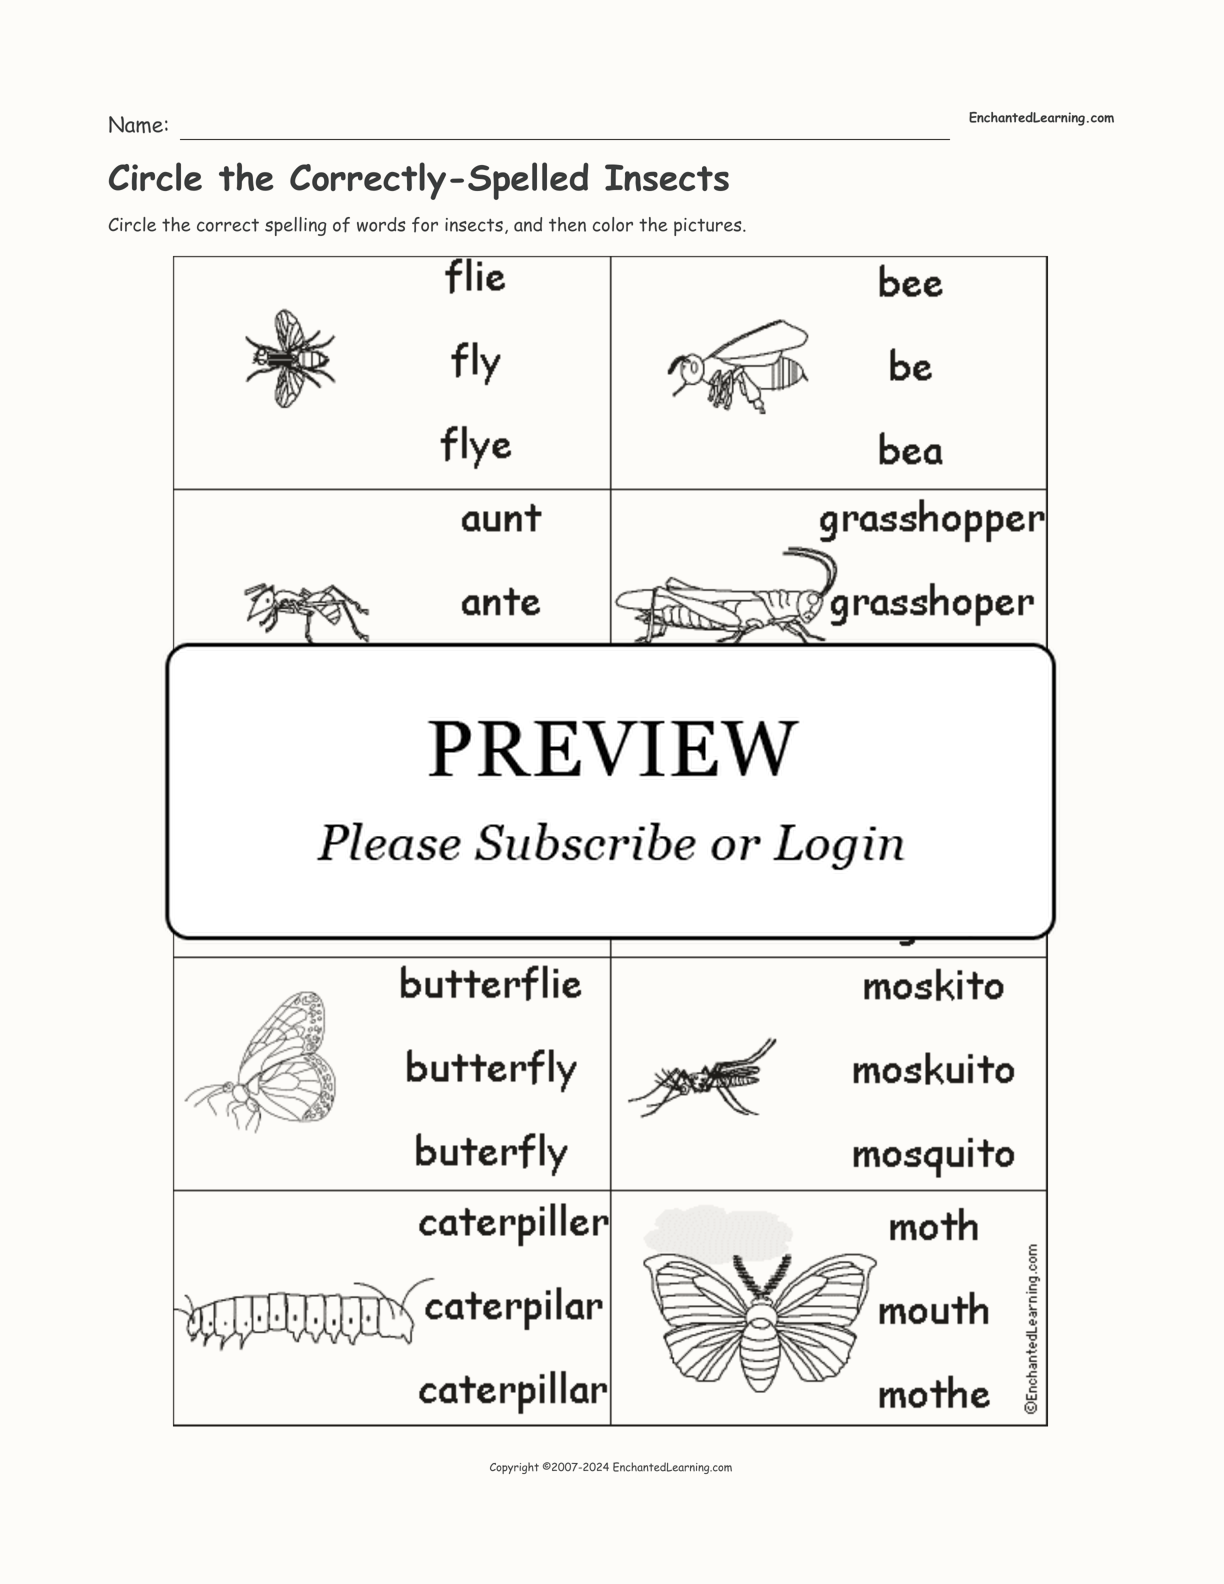 Circle the Correctly-Spelled Insects interactive worksheet page 1